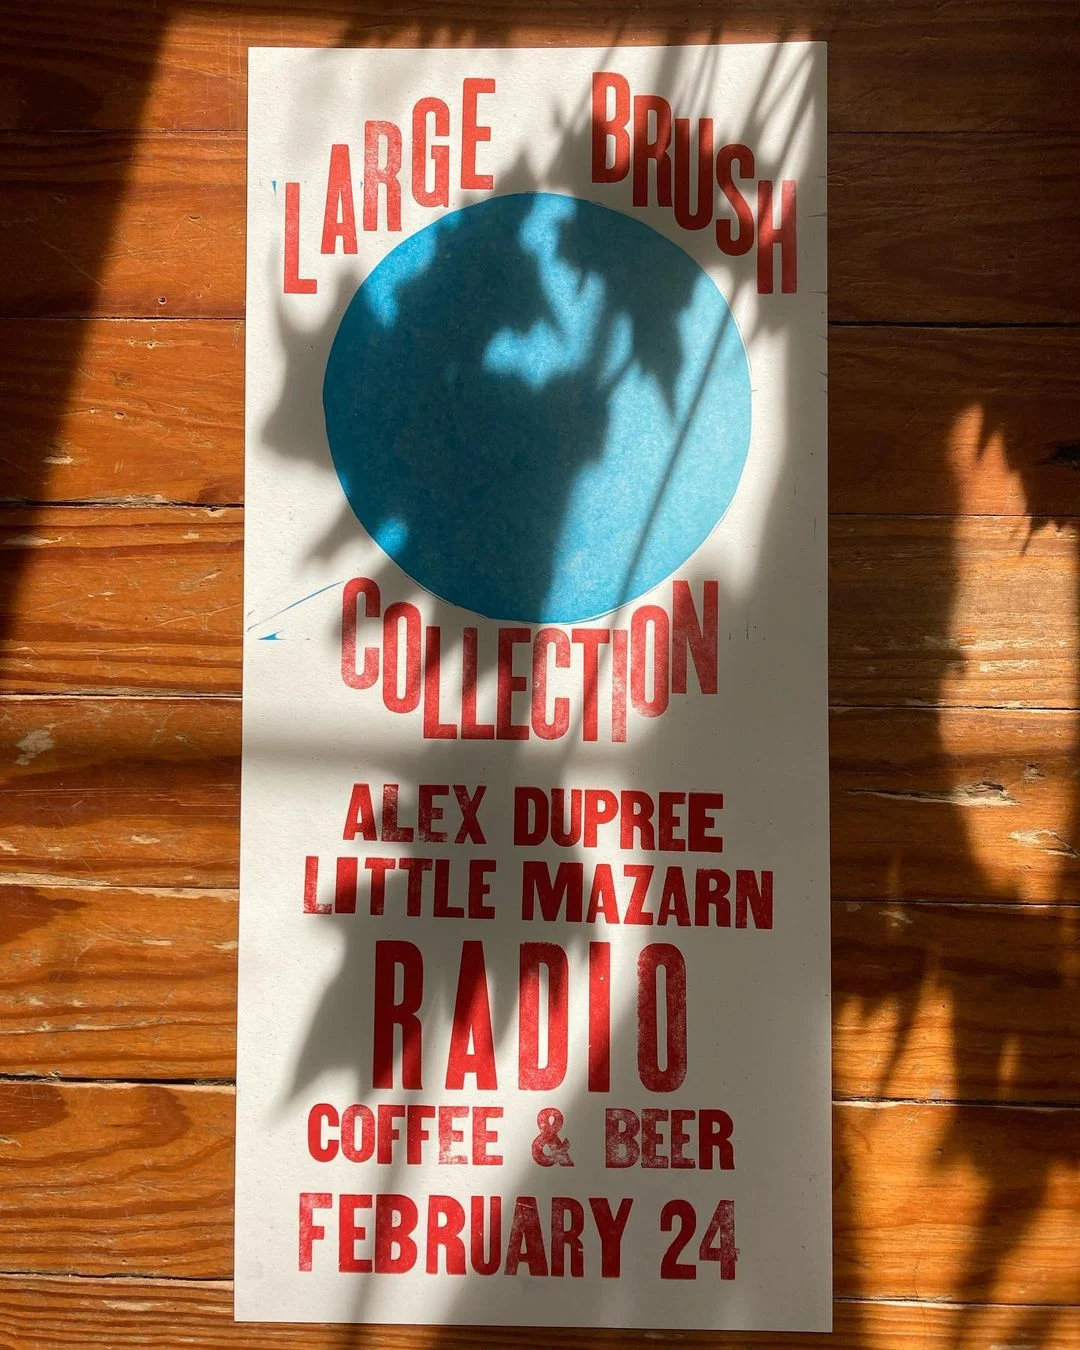 Large Brush Collection, Alex Dupree, Little Mazarn at Radio Coffee & Beer, February 24, 2023